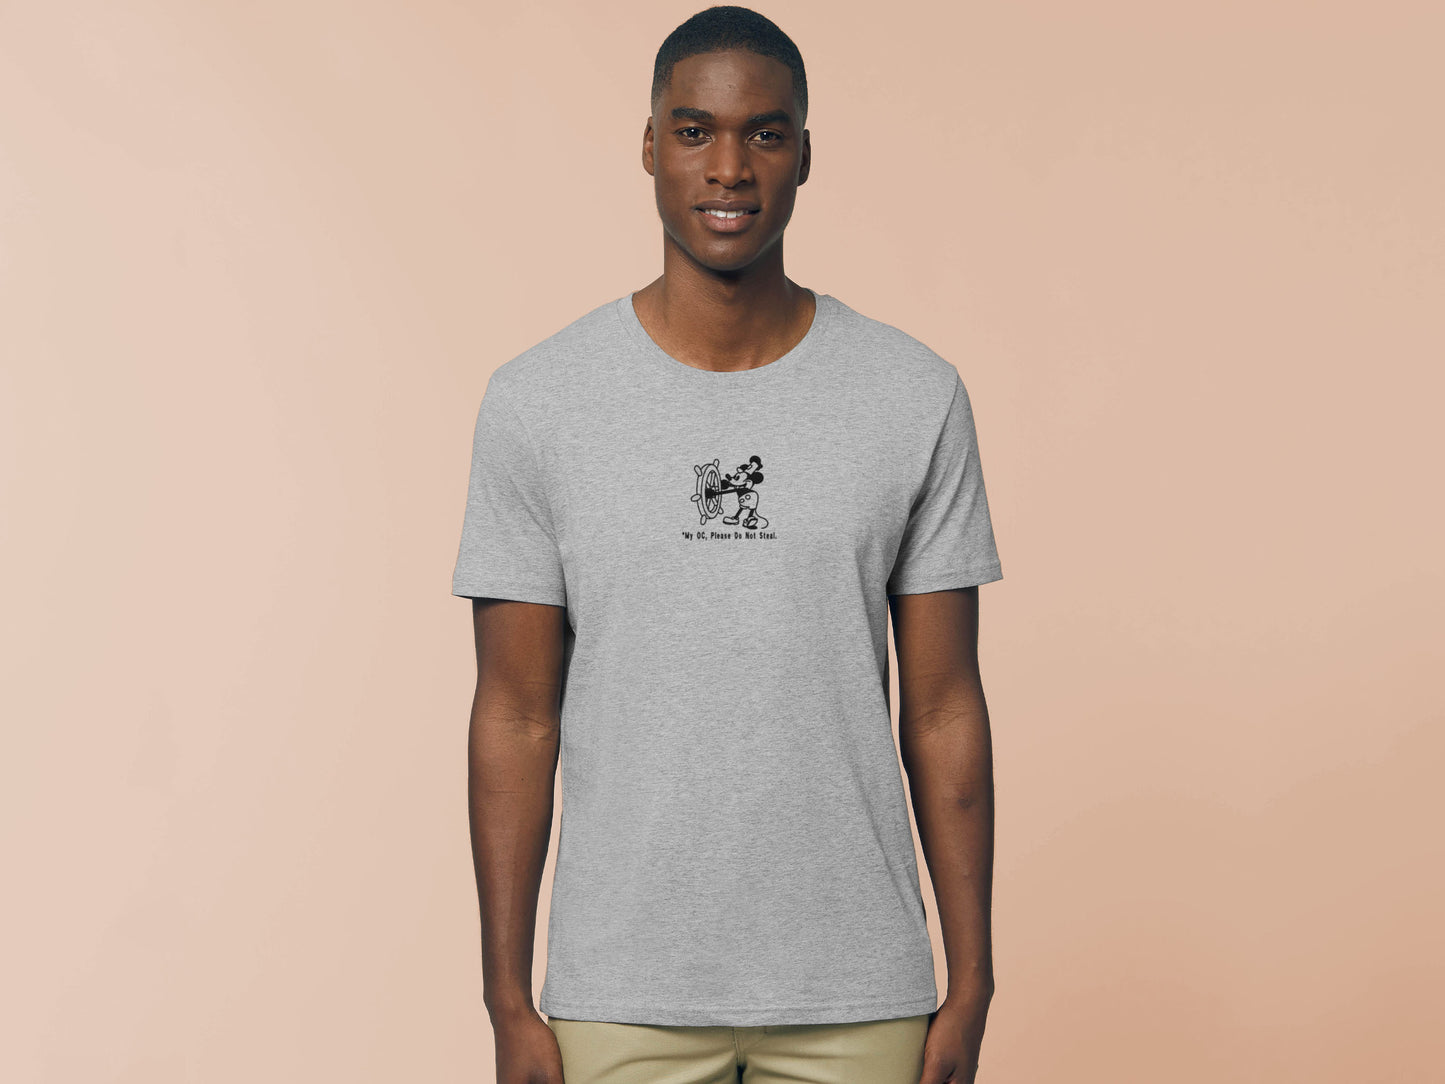 Man in short sleeved grey t-shirt with an Embroidered Black Steamboat Willie Design From Disney's original Mickey Mouse Animation with the text *My OC, Please Don't Steal.